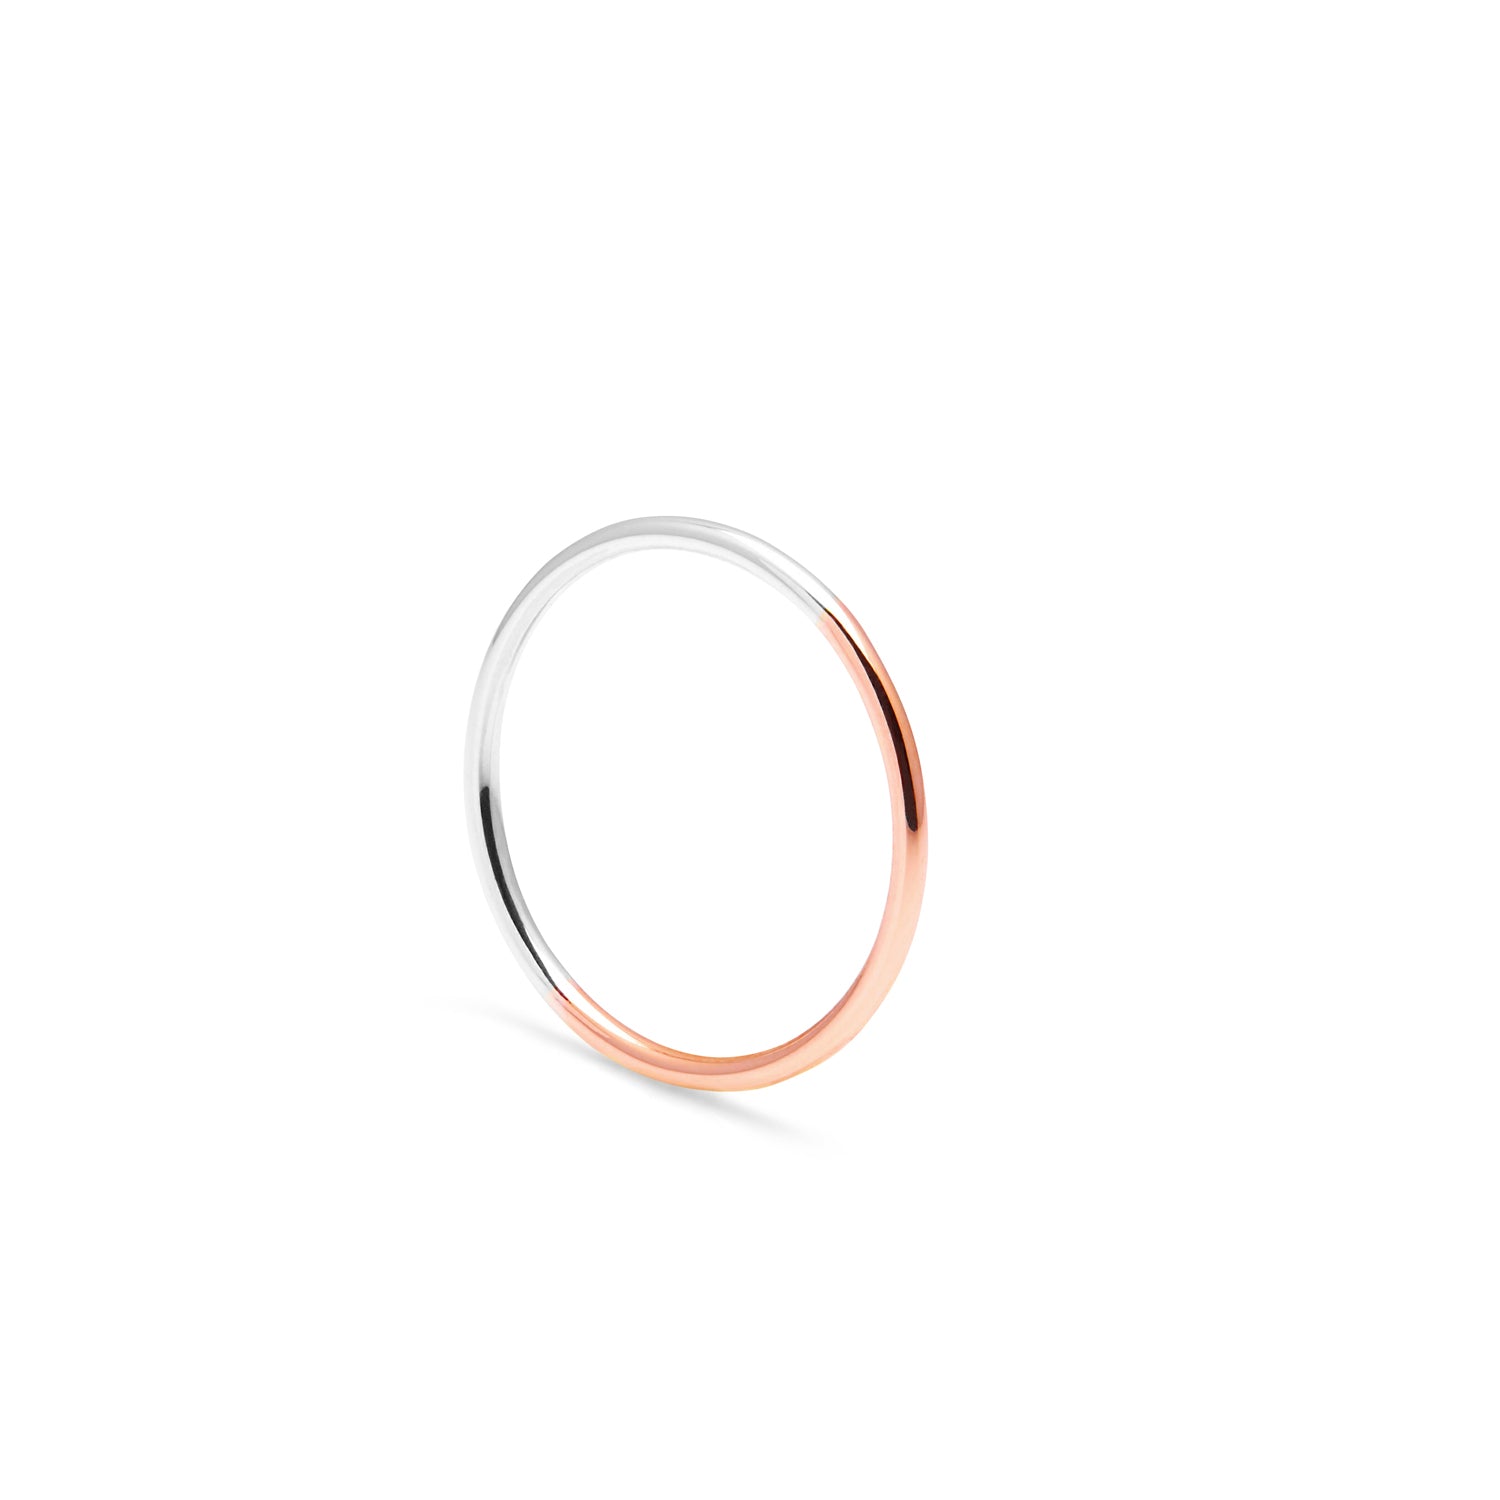 Two-tone Skinny Round Stacking Ring - 9k Rose Gold & Silver - Myia Bonner Jewellery